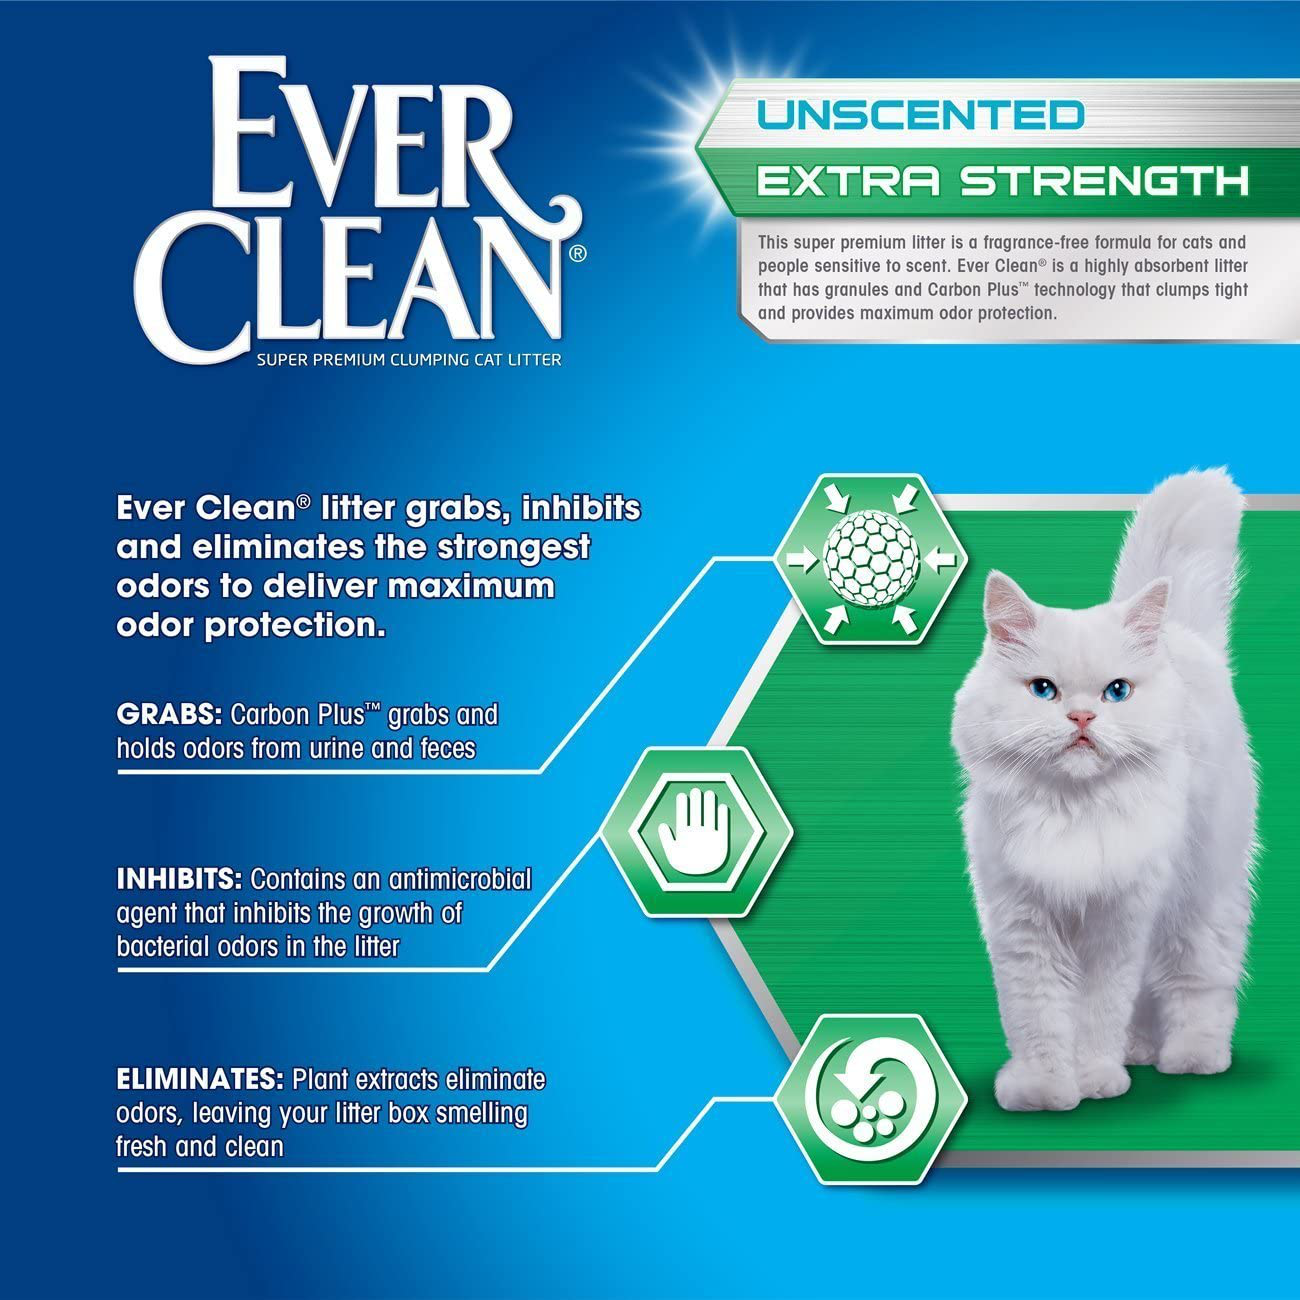 Ever Clean Extra Strength Cat Litter, Unscented